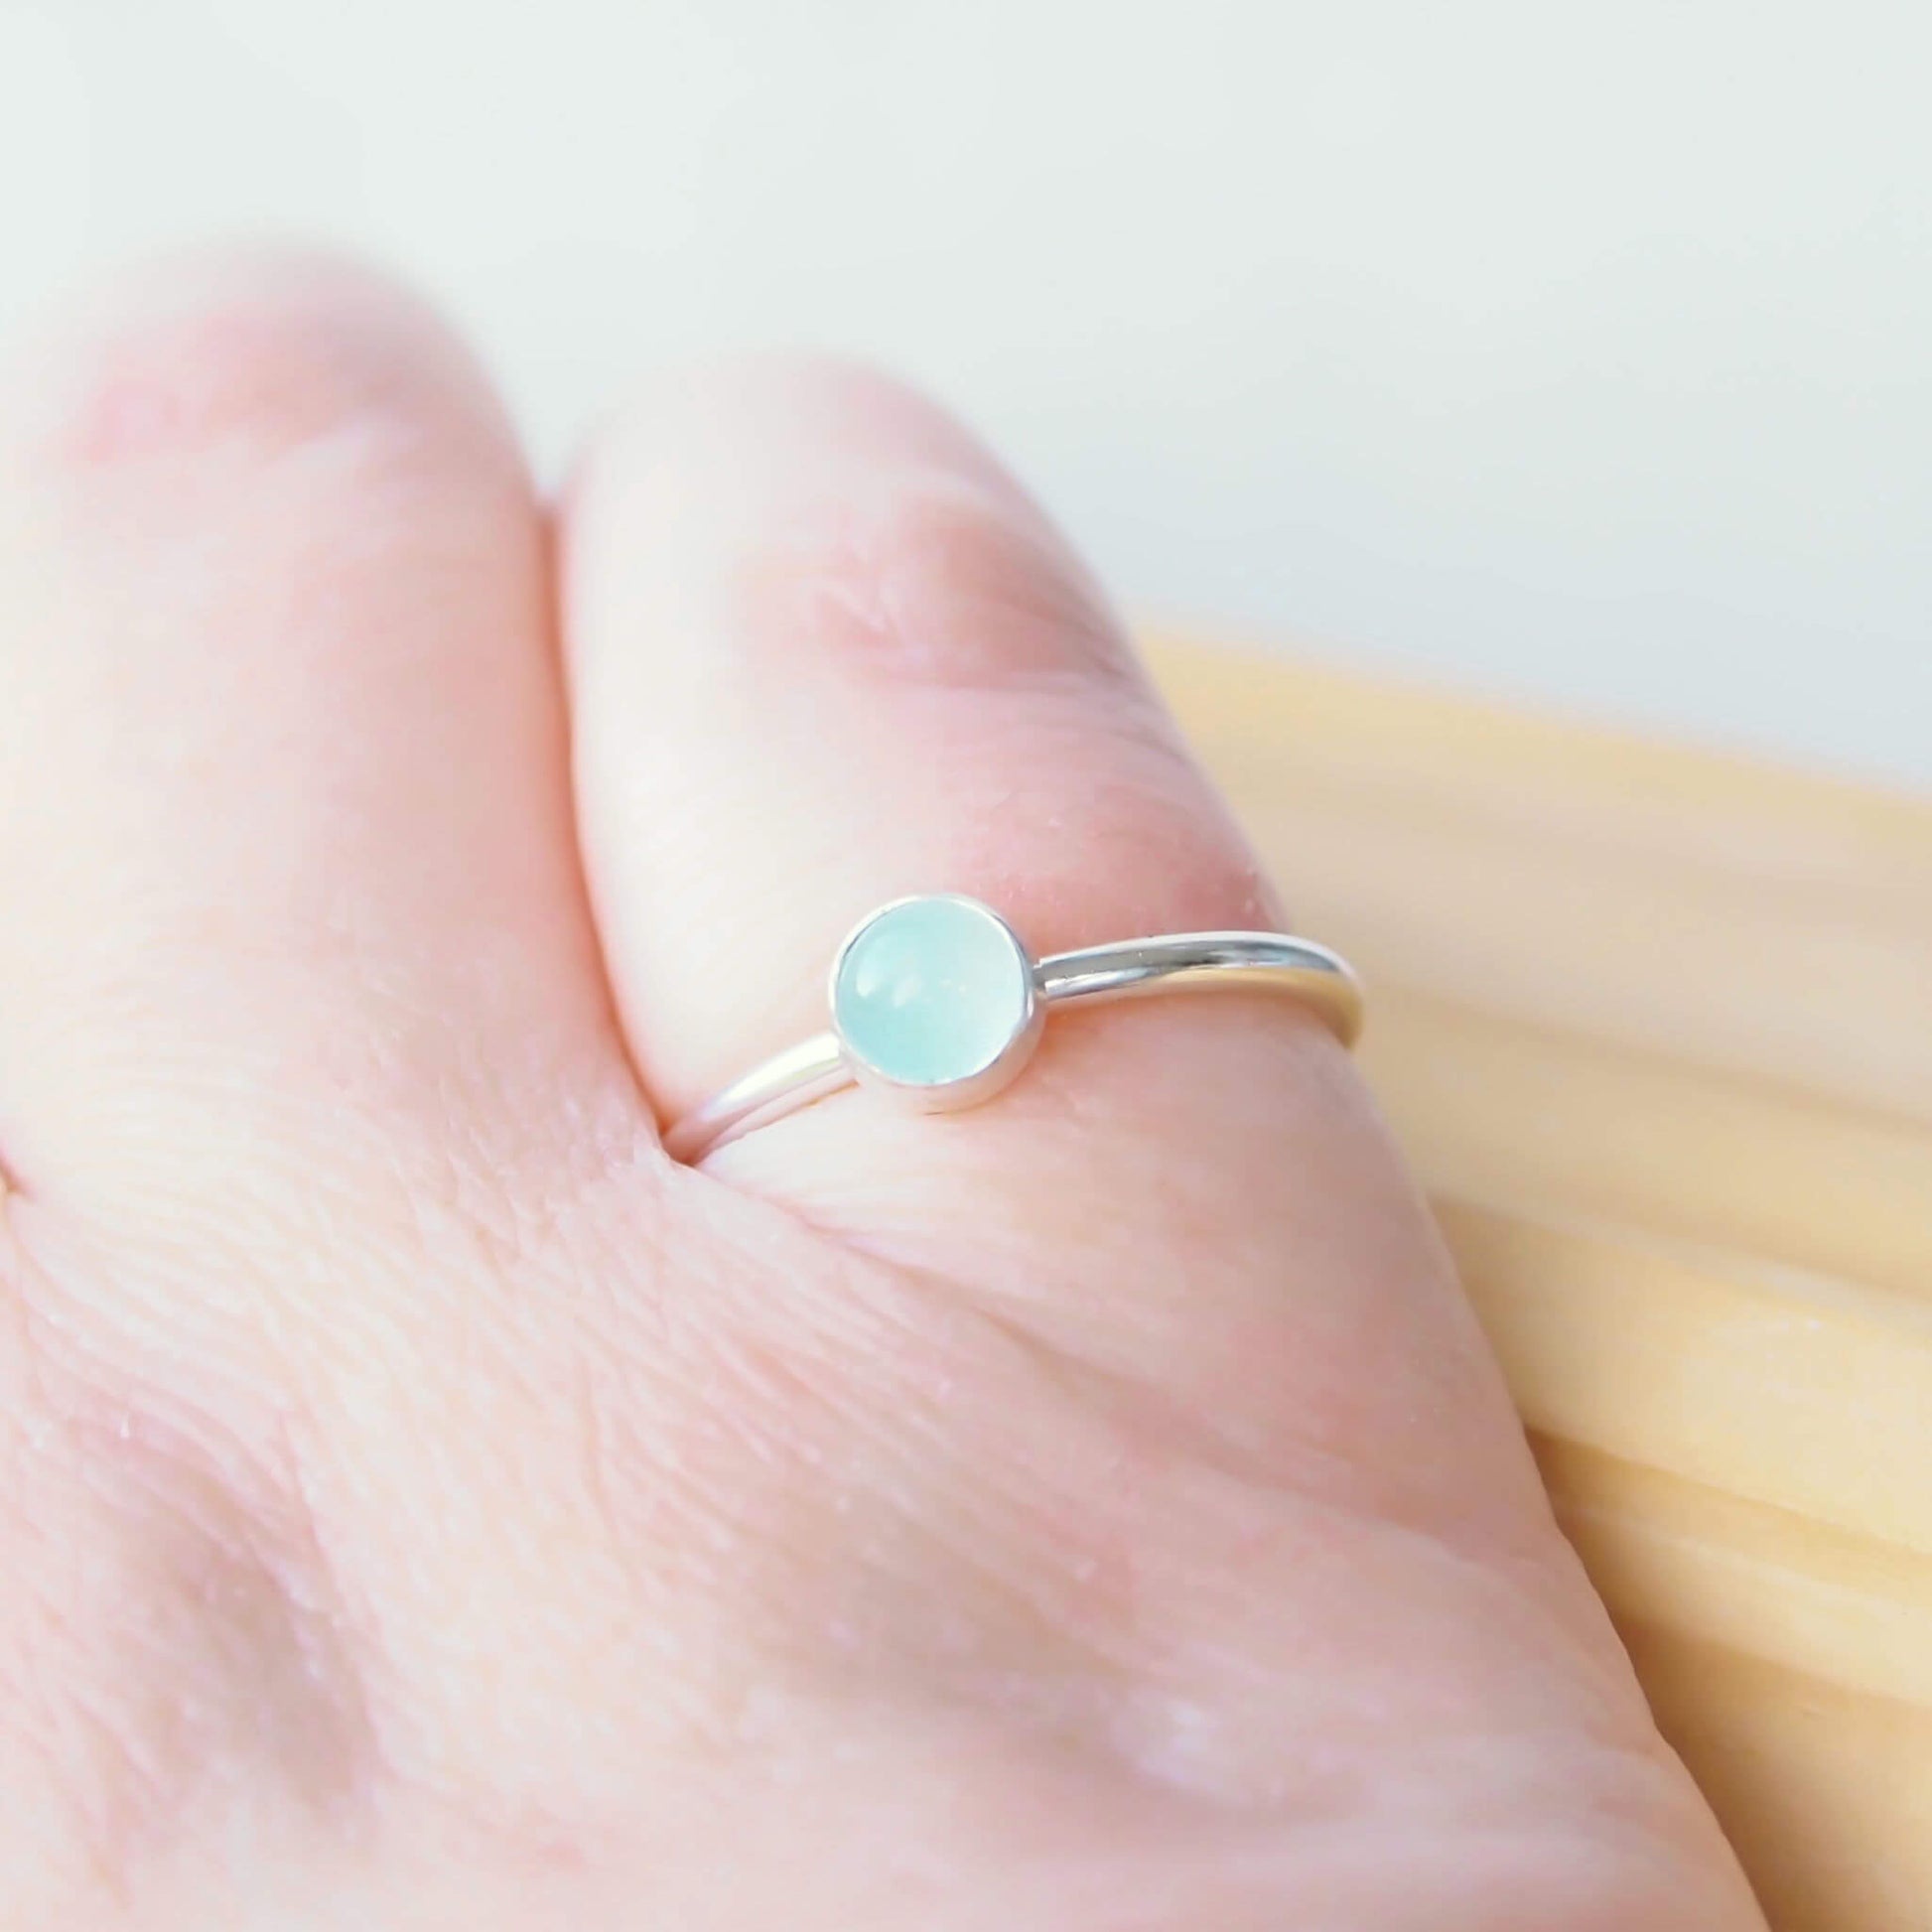 Cloudy Aquamarine birthstone ring for March. A 5mm round pale blue cabochon set simply onto a simple round band. The ring is made to measure to your size by maram jewellery in Scotland